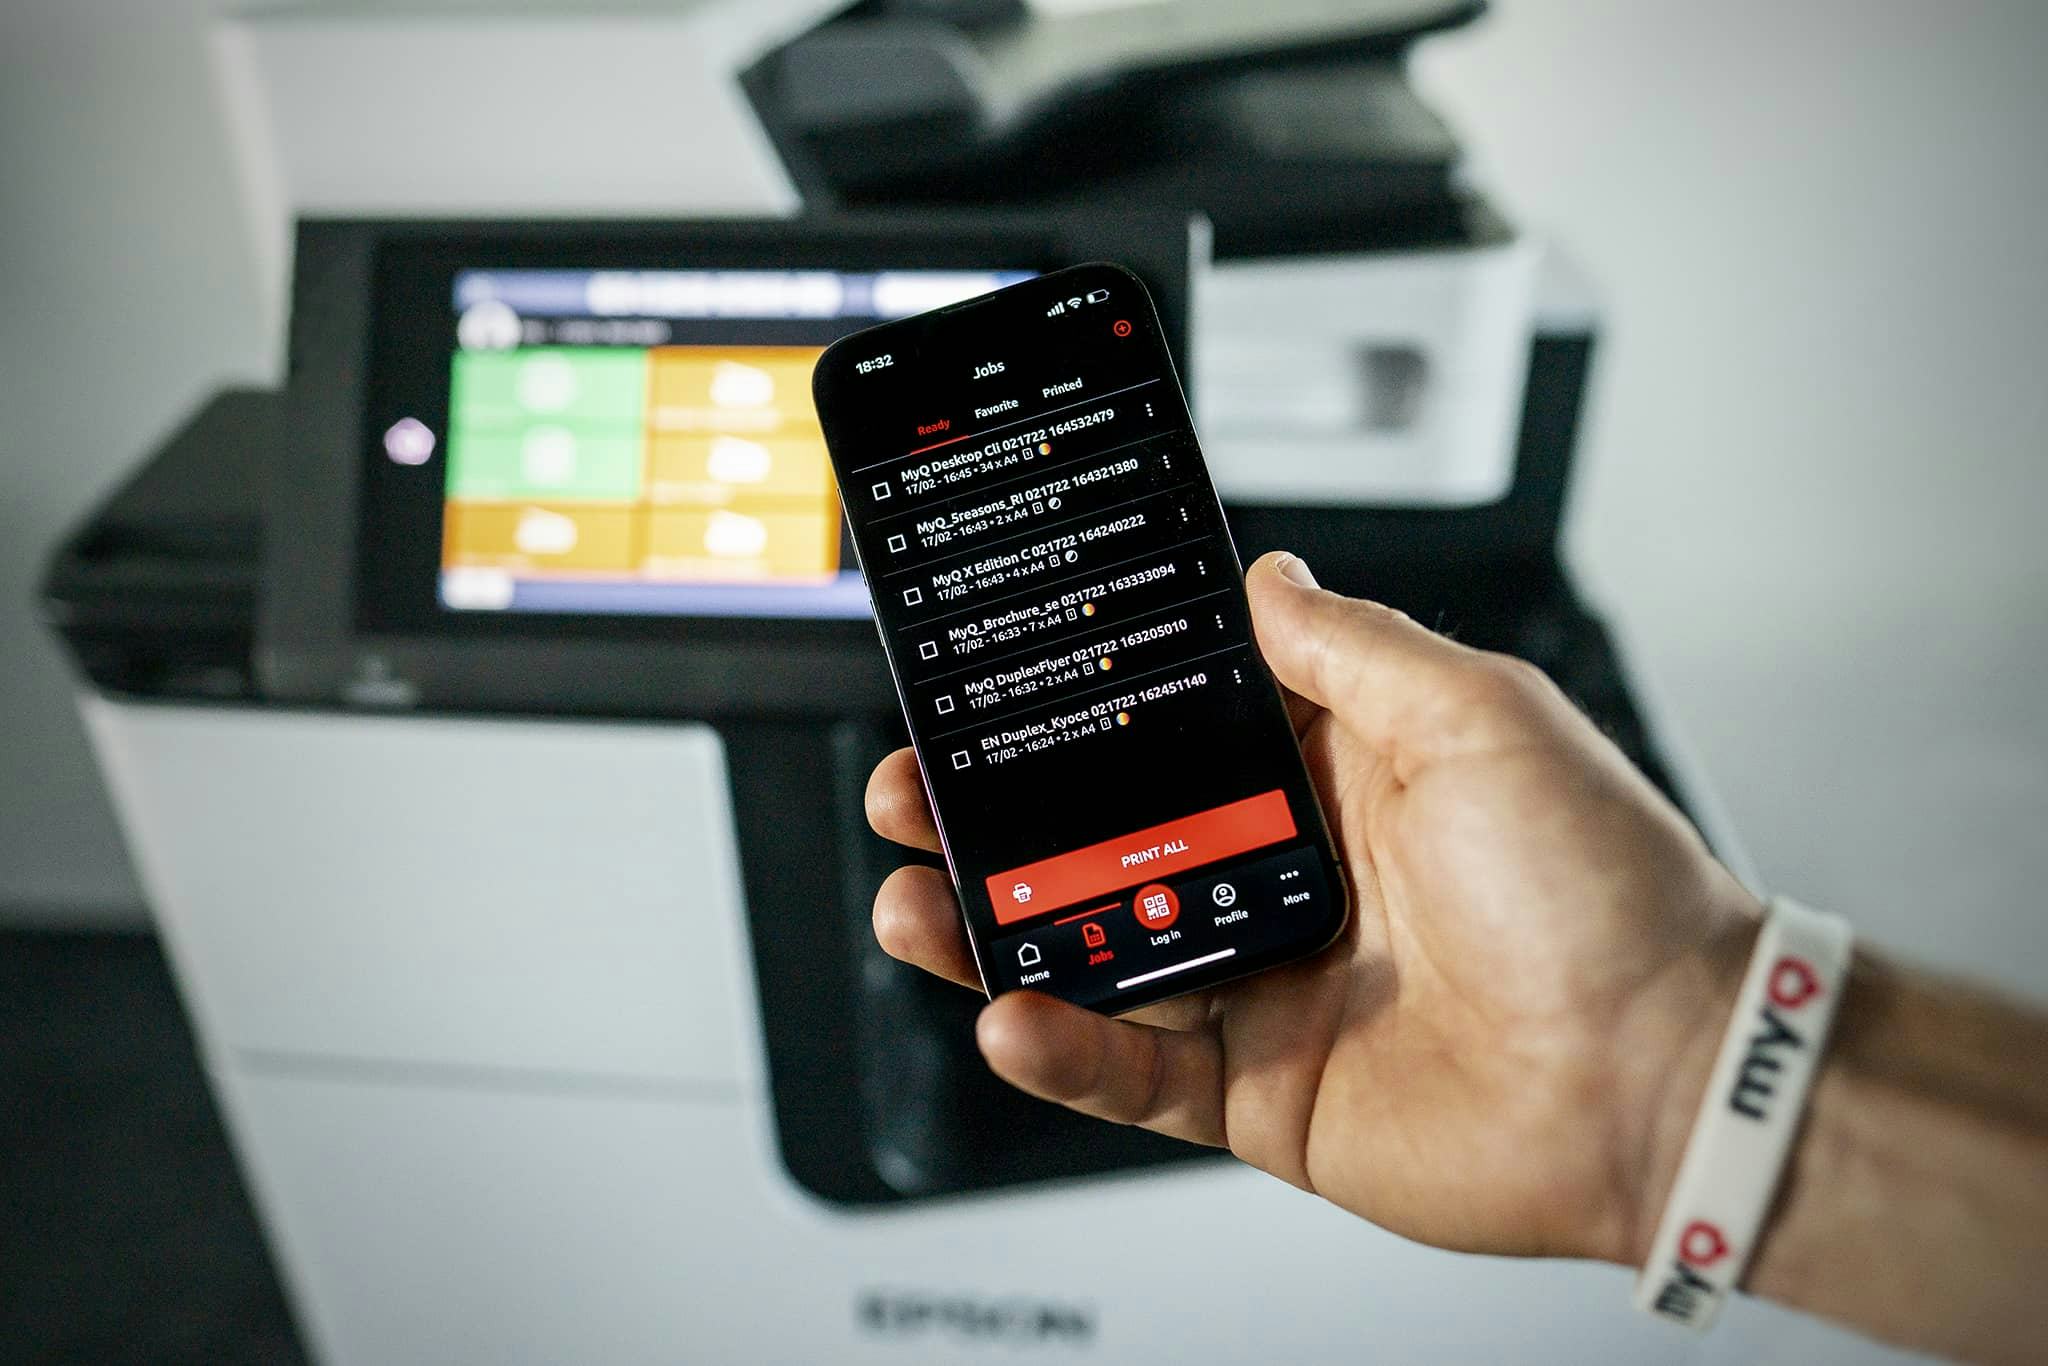 MyQ X Software - Users can manage their print jobs with their mobile phone or tablet with the MyQ X Mobile Client application (iOS and Android).